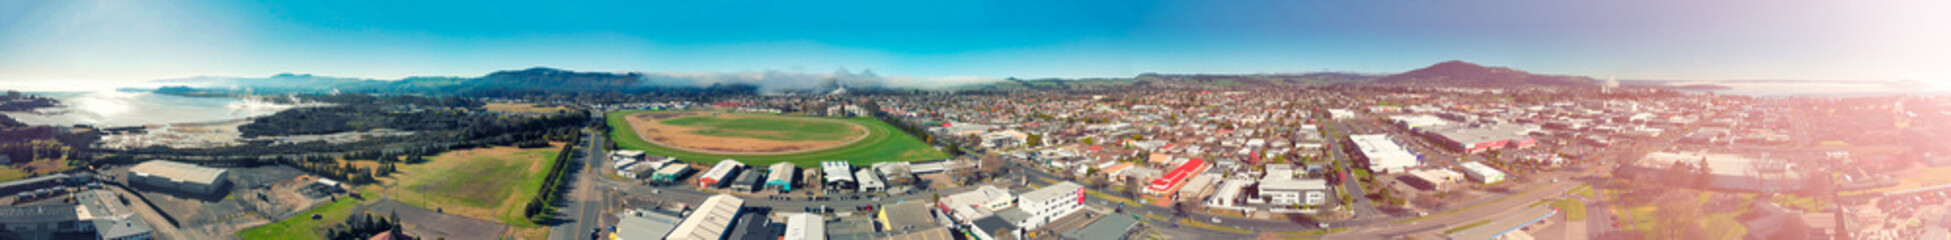 Panoramic aerial view of Rotorua landscape and geysers smoke, New Zealand from drone